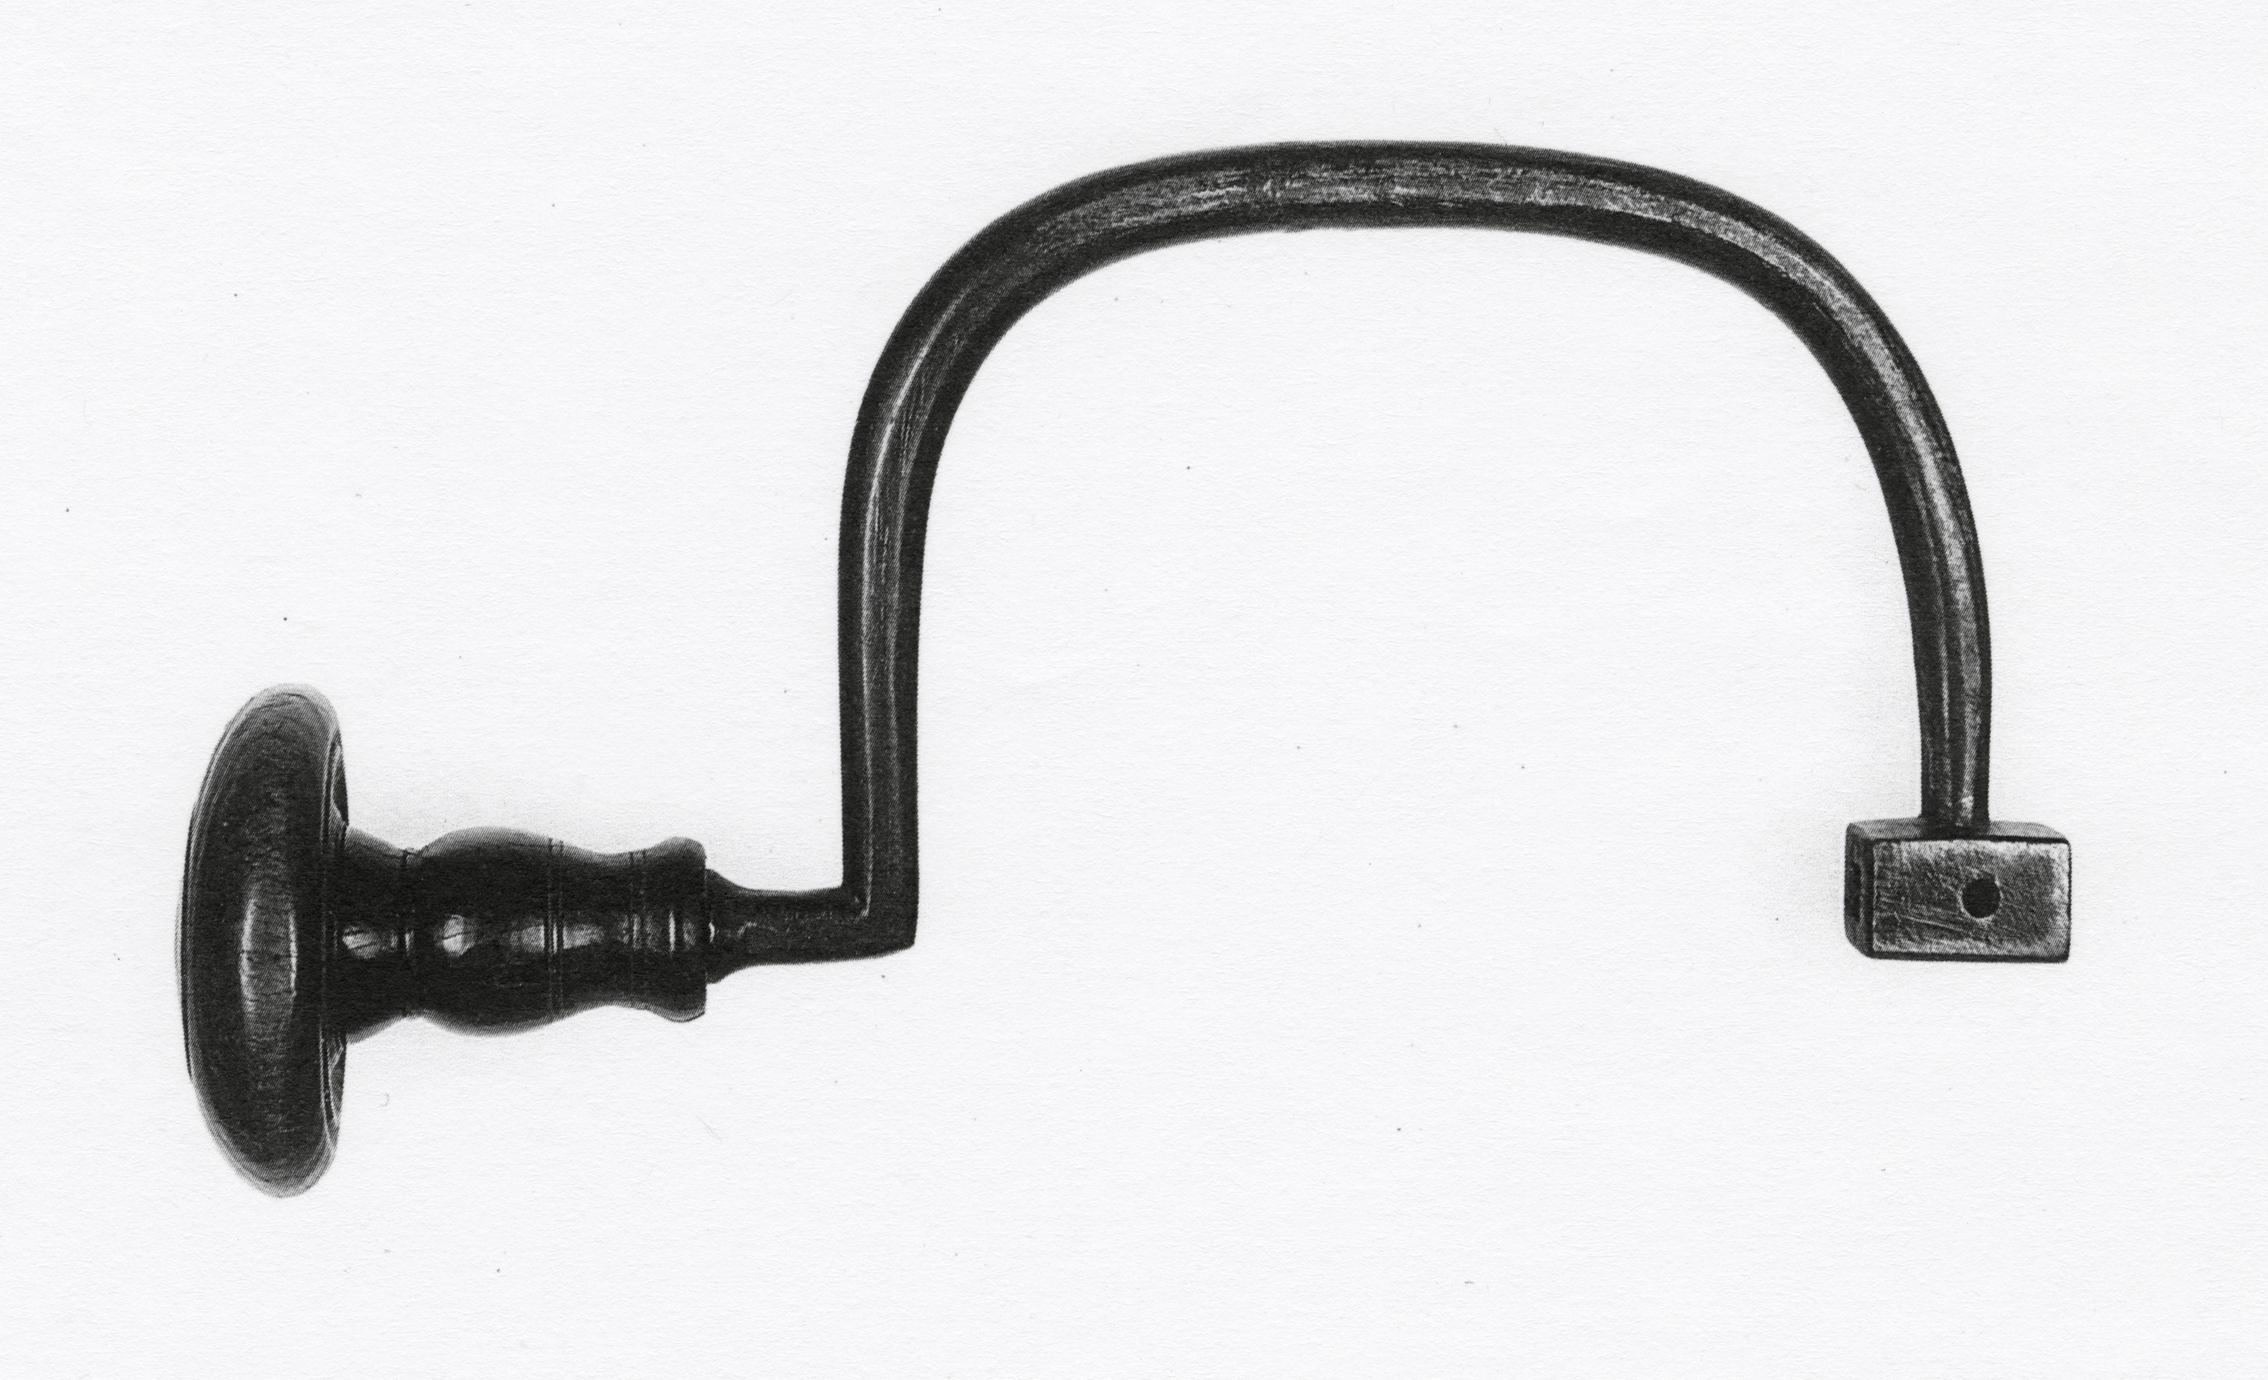 Example of a brace.